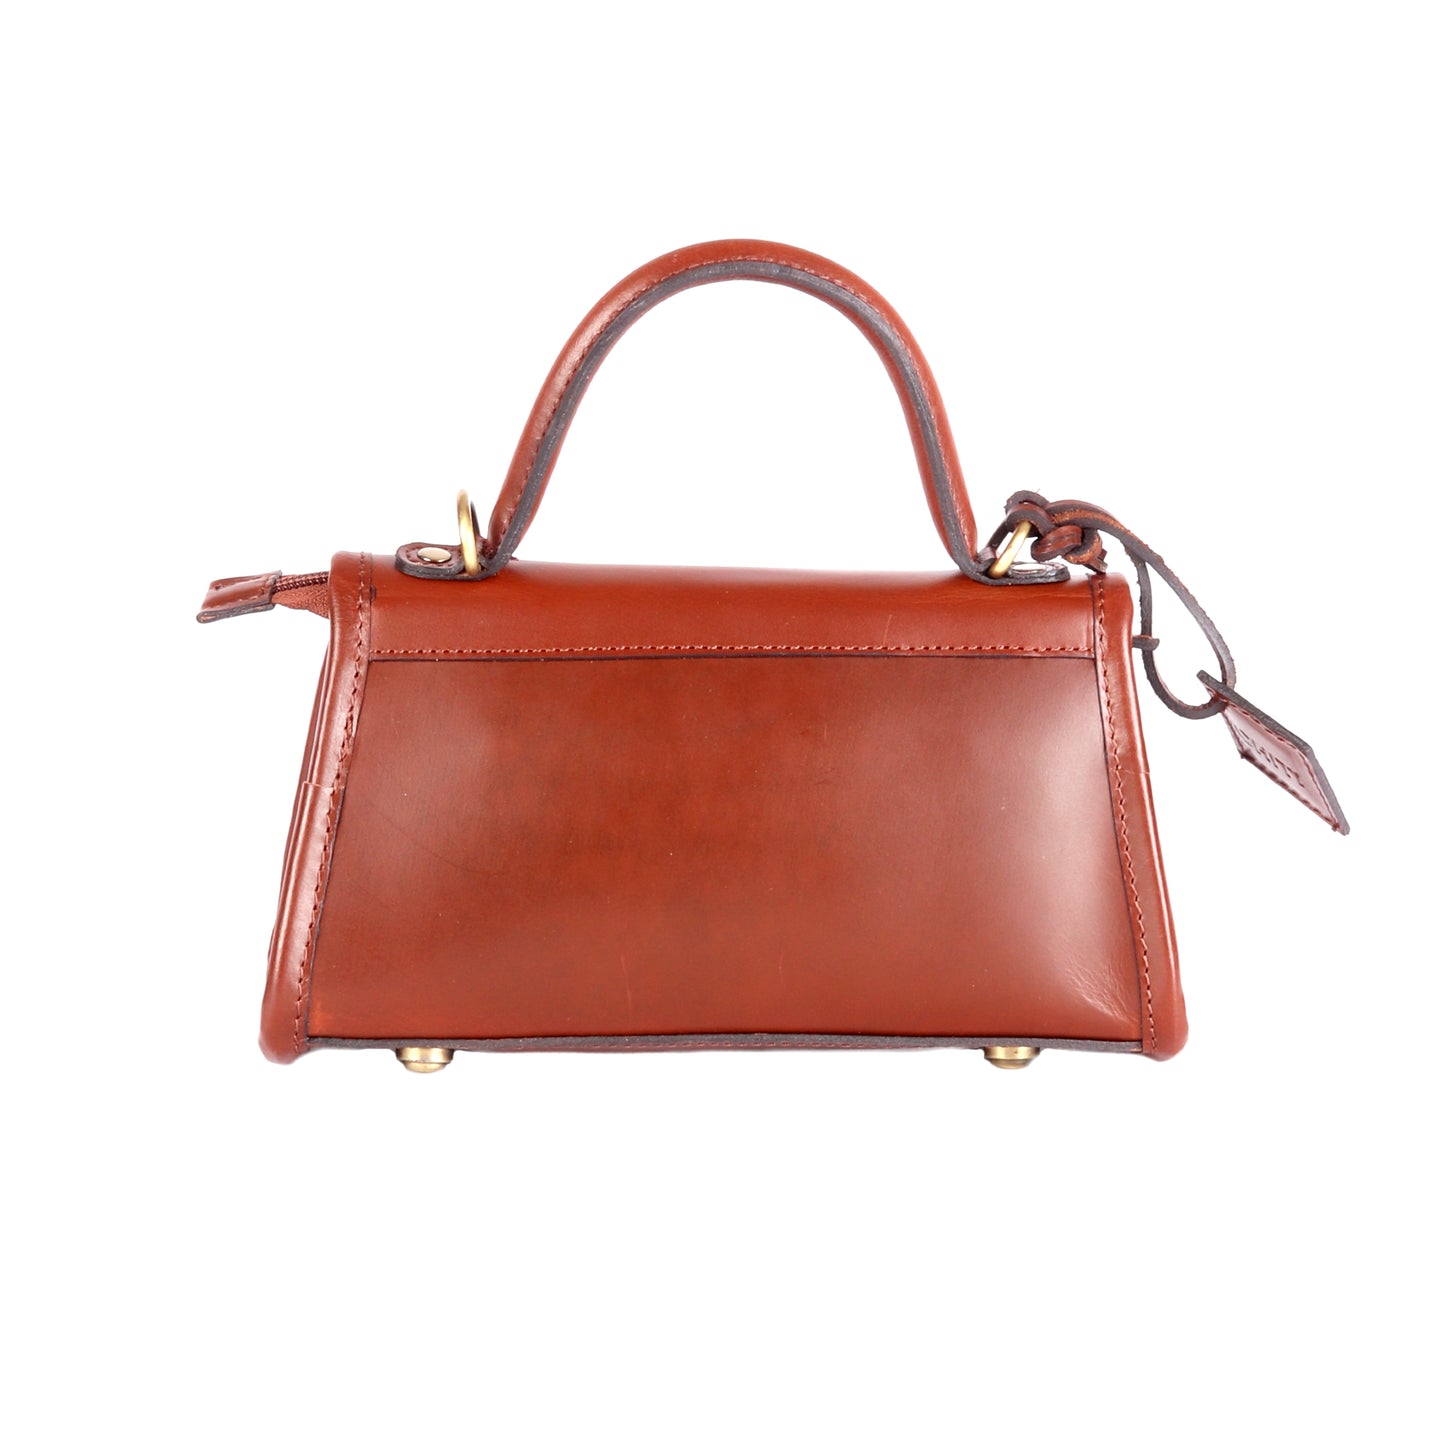 Phobos Small Brown Leather Satchel